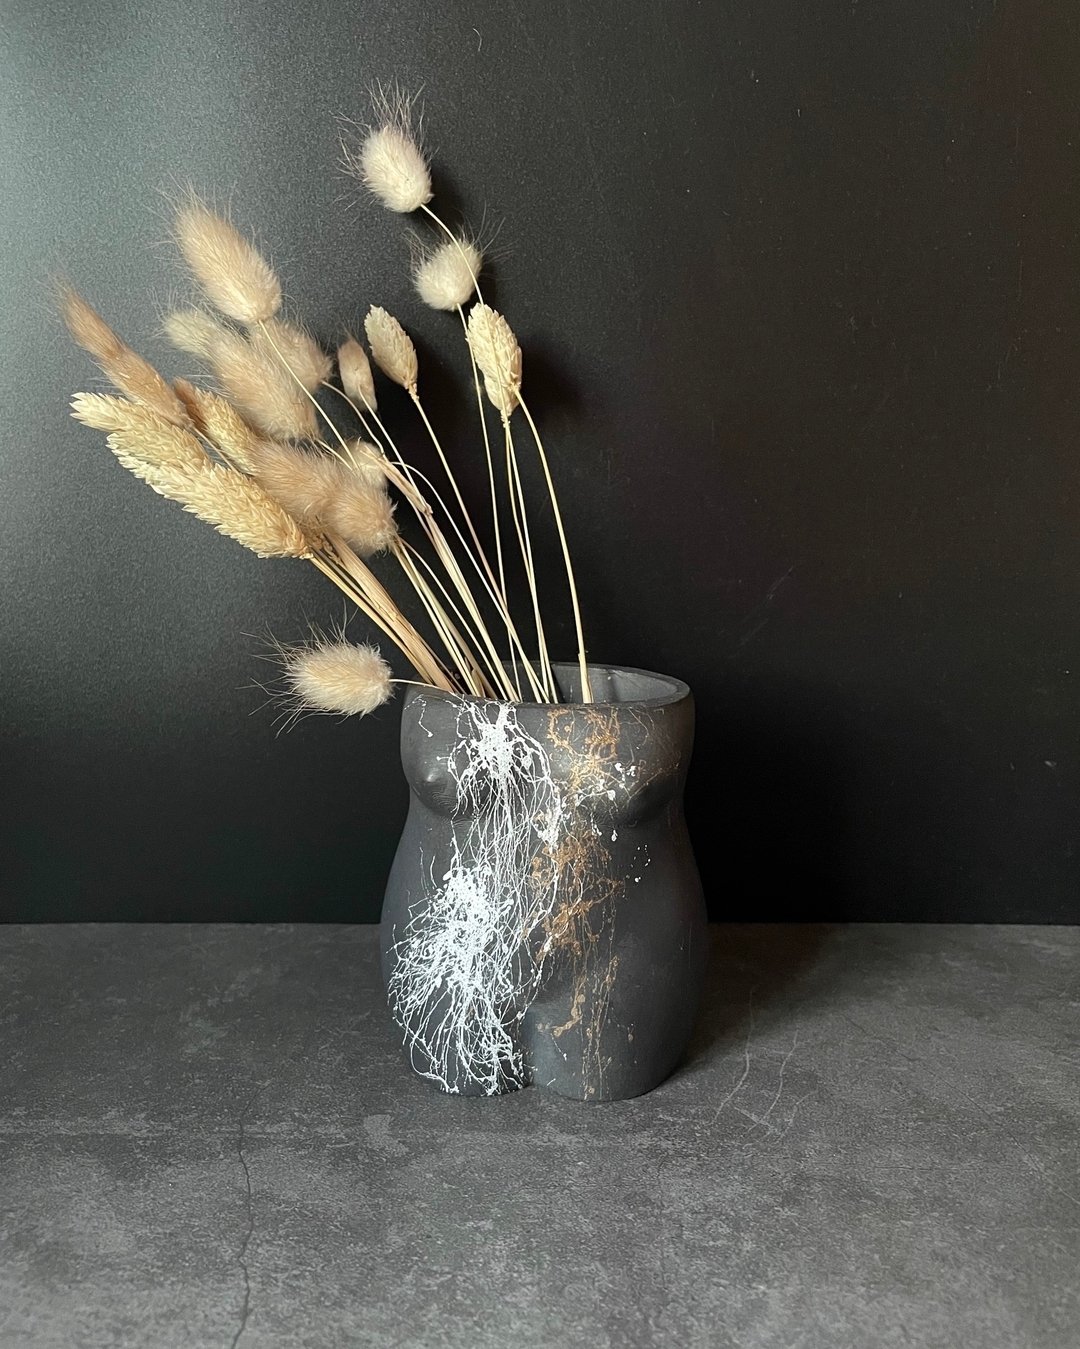 🖤Our Female Body Vase is a work of art, lovingly moulded and hand-sprayed for a finish that ensures each piece is truly one-of-a-kind. 👩🏽&zwj;🎨

𝙎 𝙃 𝙊 𝙋 | 𝙬𝙬𝙬.𝙢𝙖𝙪𝙧𝙚𝙚𝙣𝙡𝙪𝙭𝙚𝙨𝙩𝙪𝙙𝙞𝙤.𝙘𝙤𝙢

#vase #homedecor #flowers #ceramics #